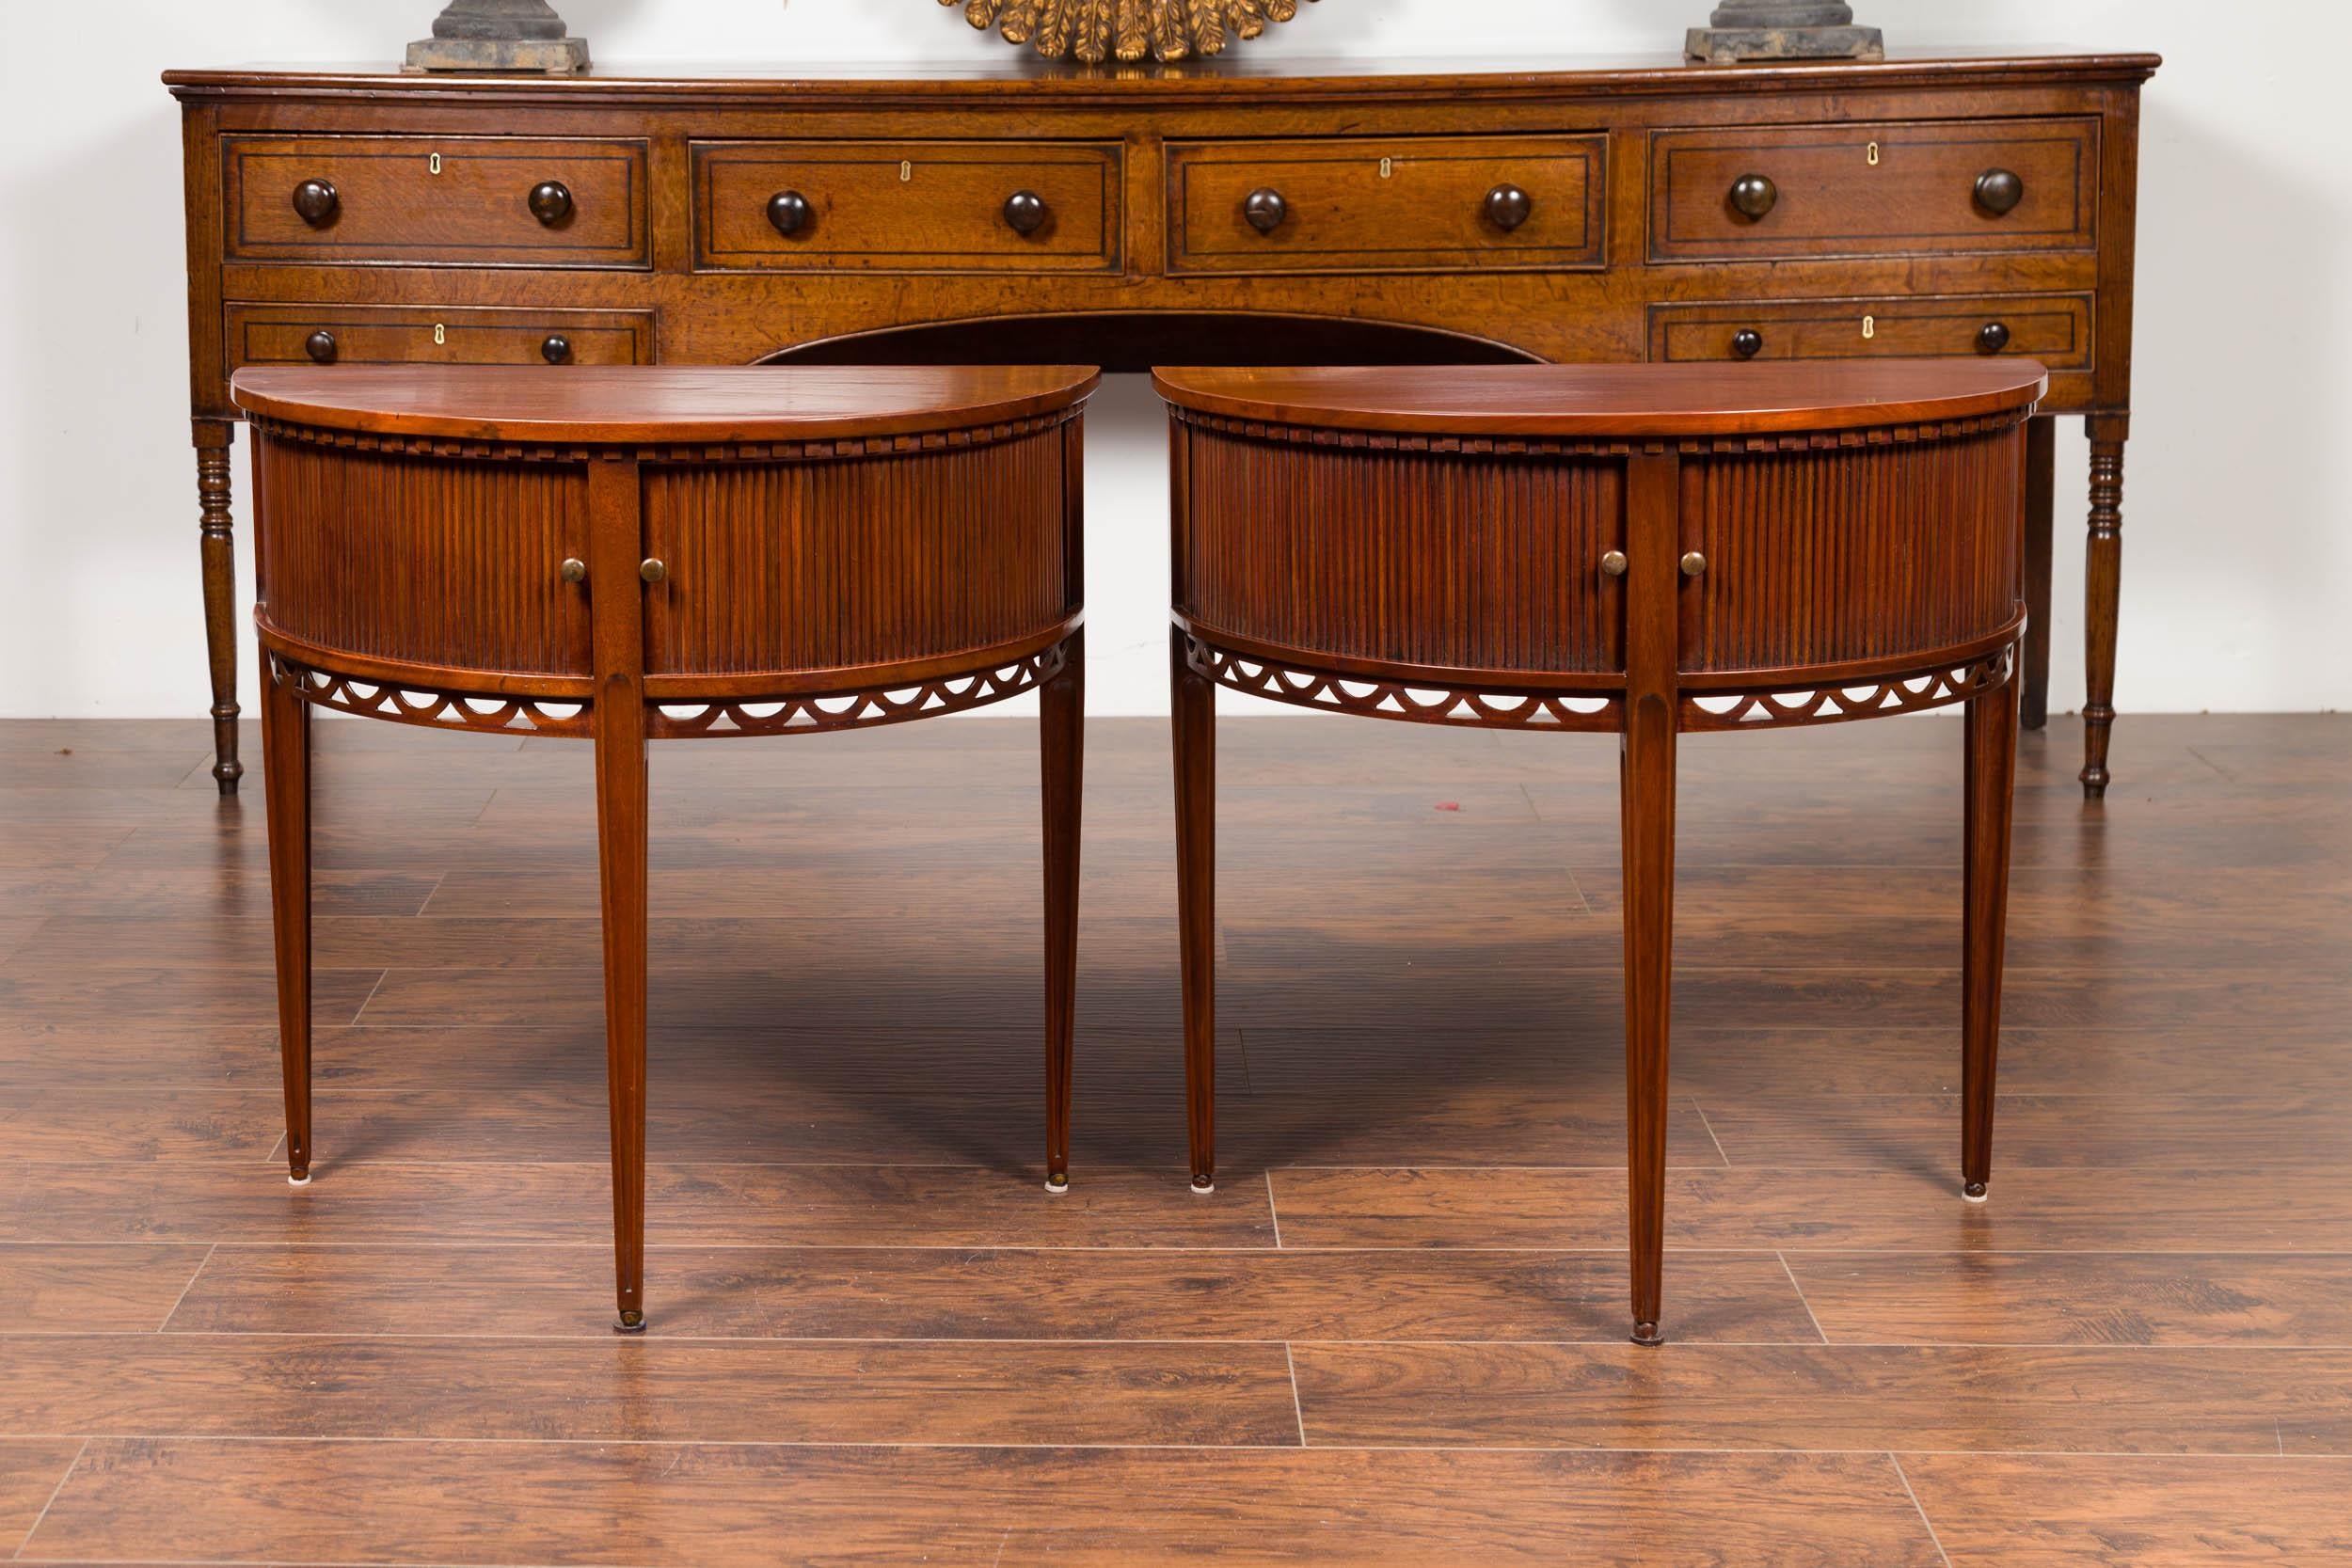 A pair of English mahogany demilune tables from the late 19th century, with reeded sliding doors and carved apron. Born in England during the third quarter of the 19th century, each of this pair of demilune features a semi-circular top sitting above